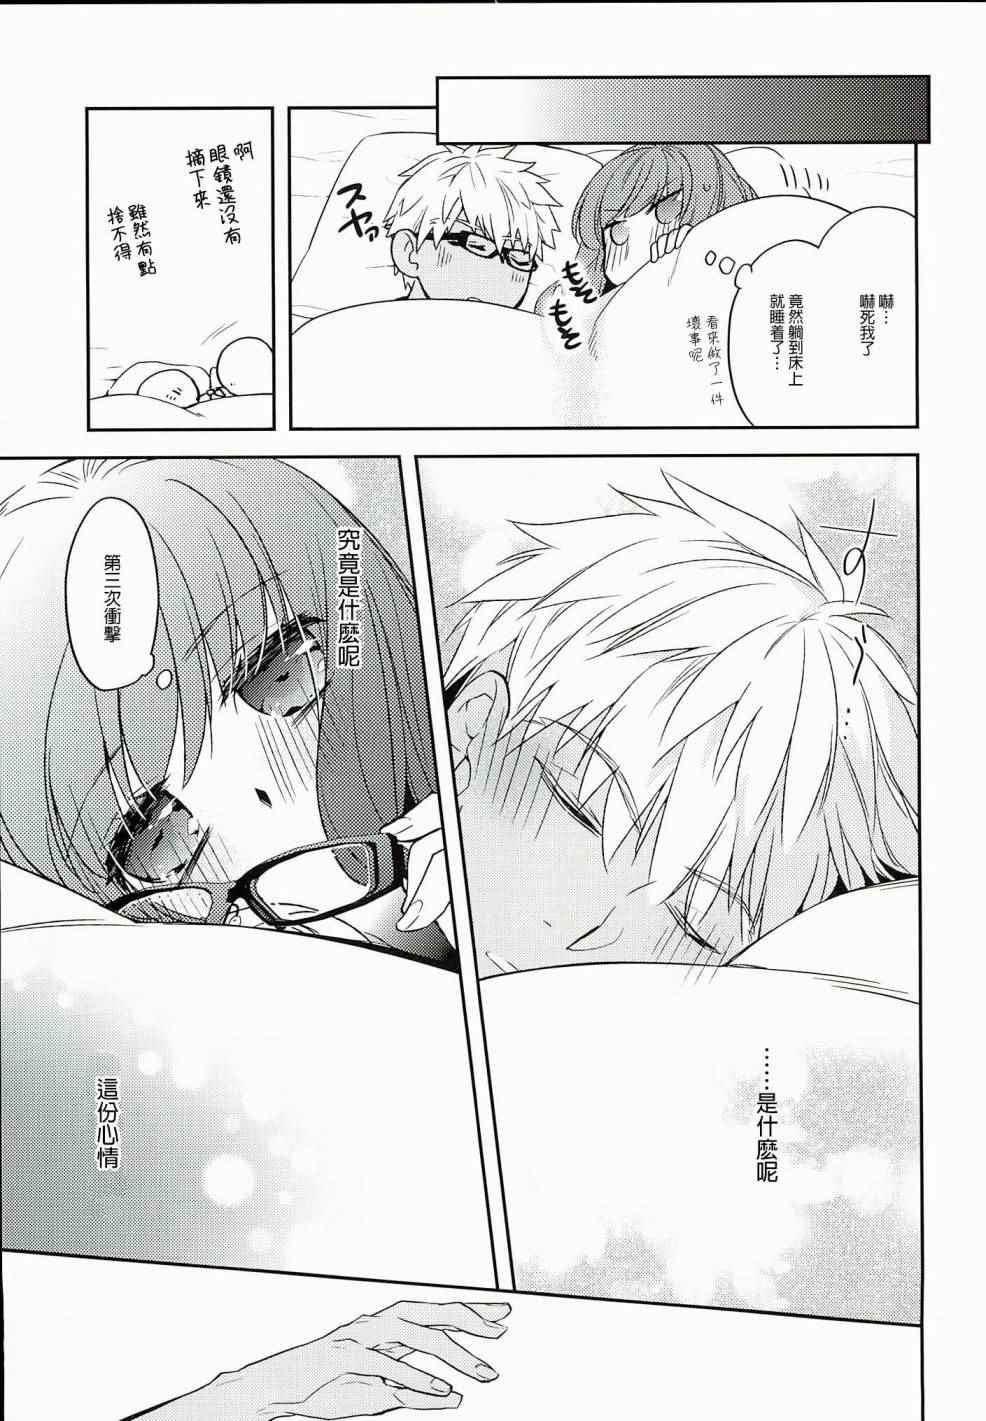 《The Town Slept》漫画 短篇